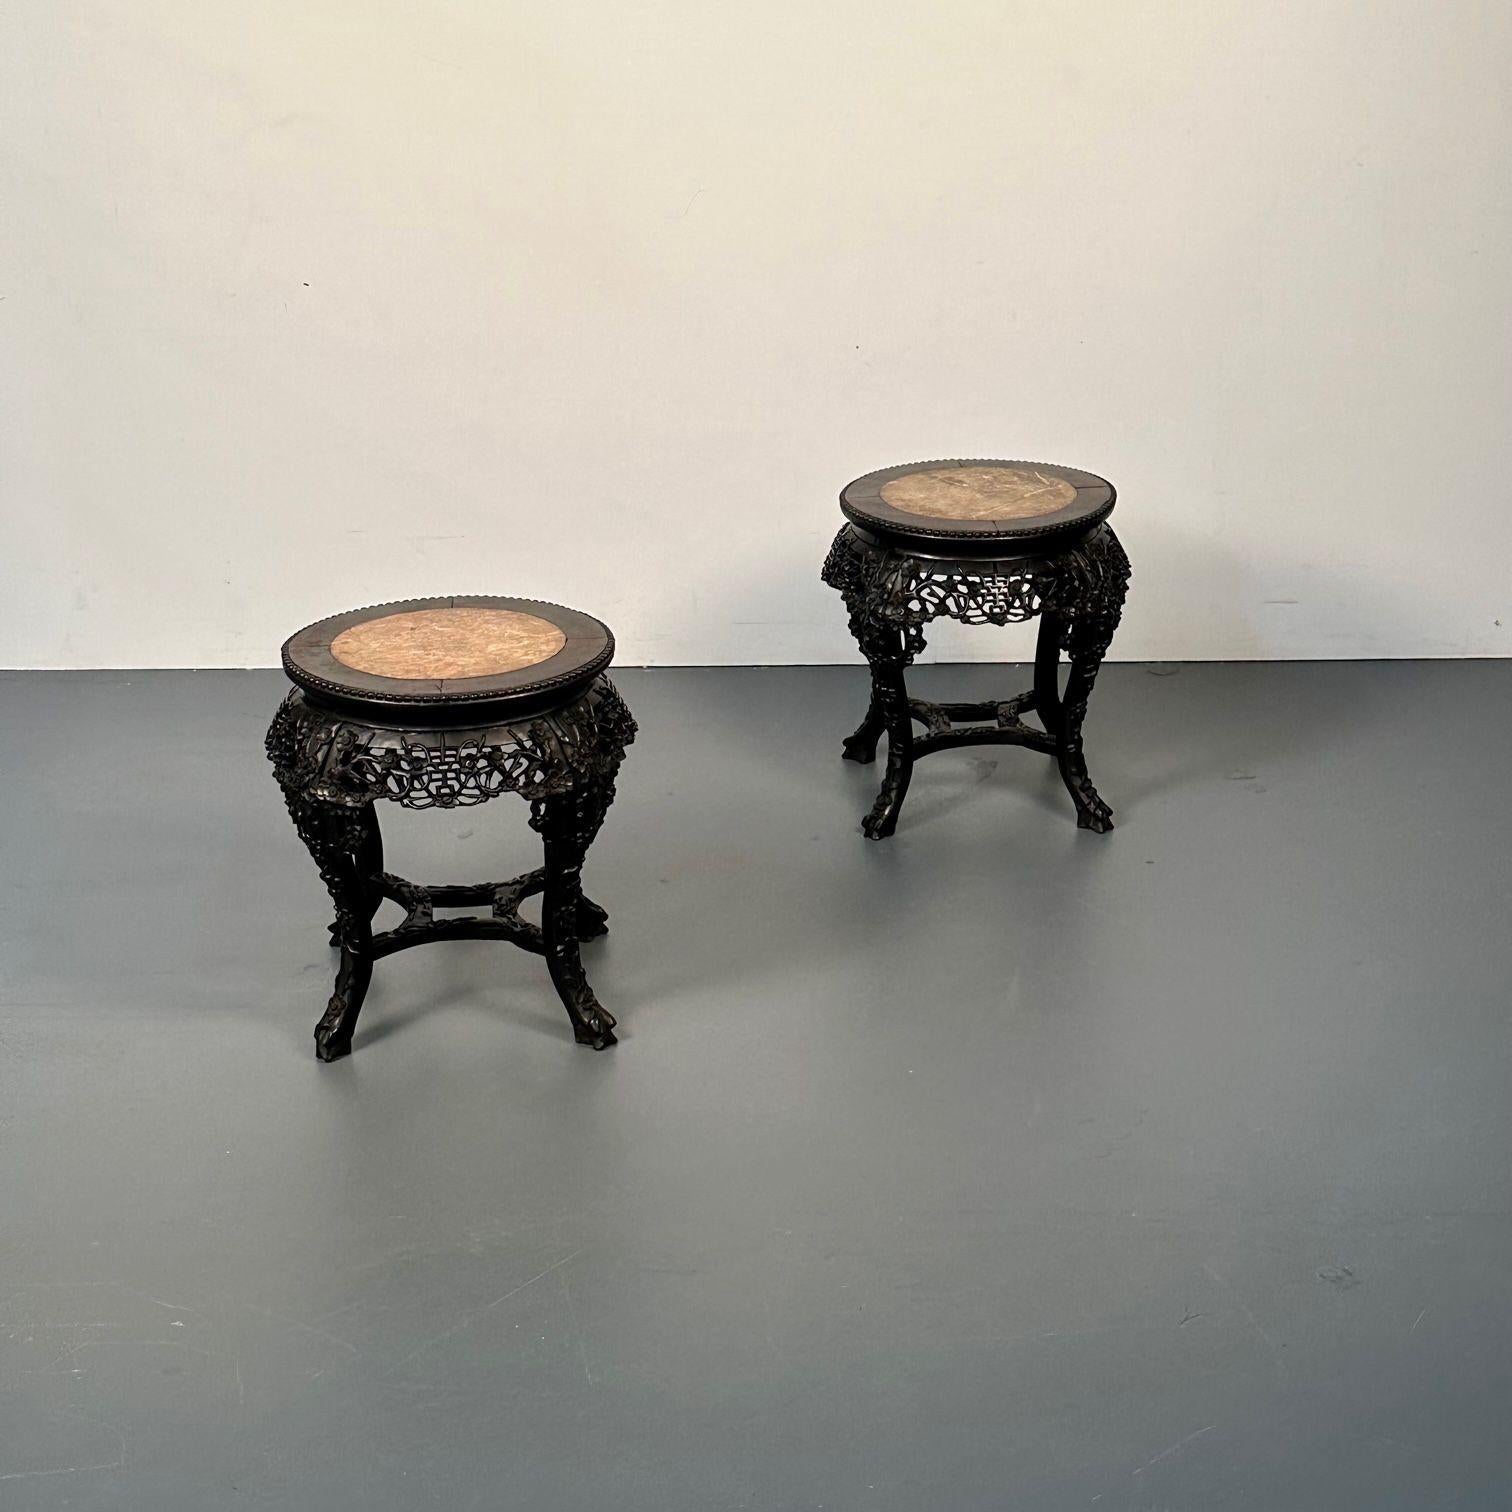 Pair of Hand Carved Oriental Chinese Pedestals / Low Tables, Teak Wood, Marble 1